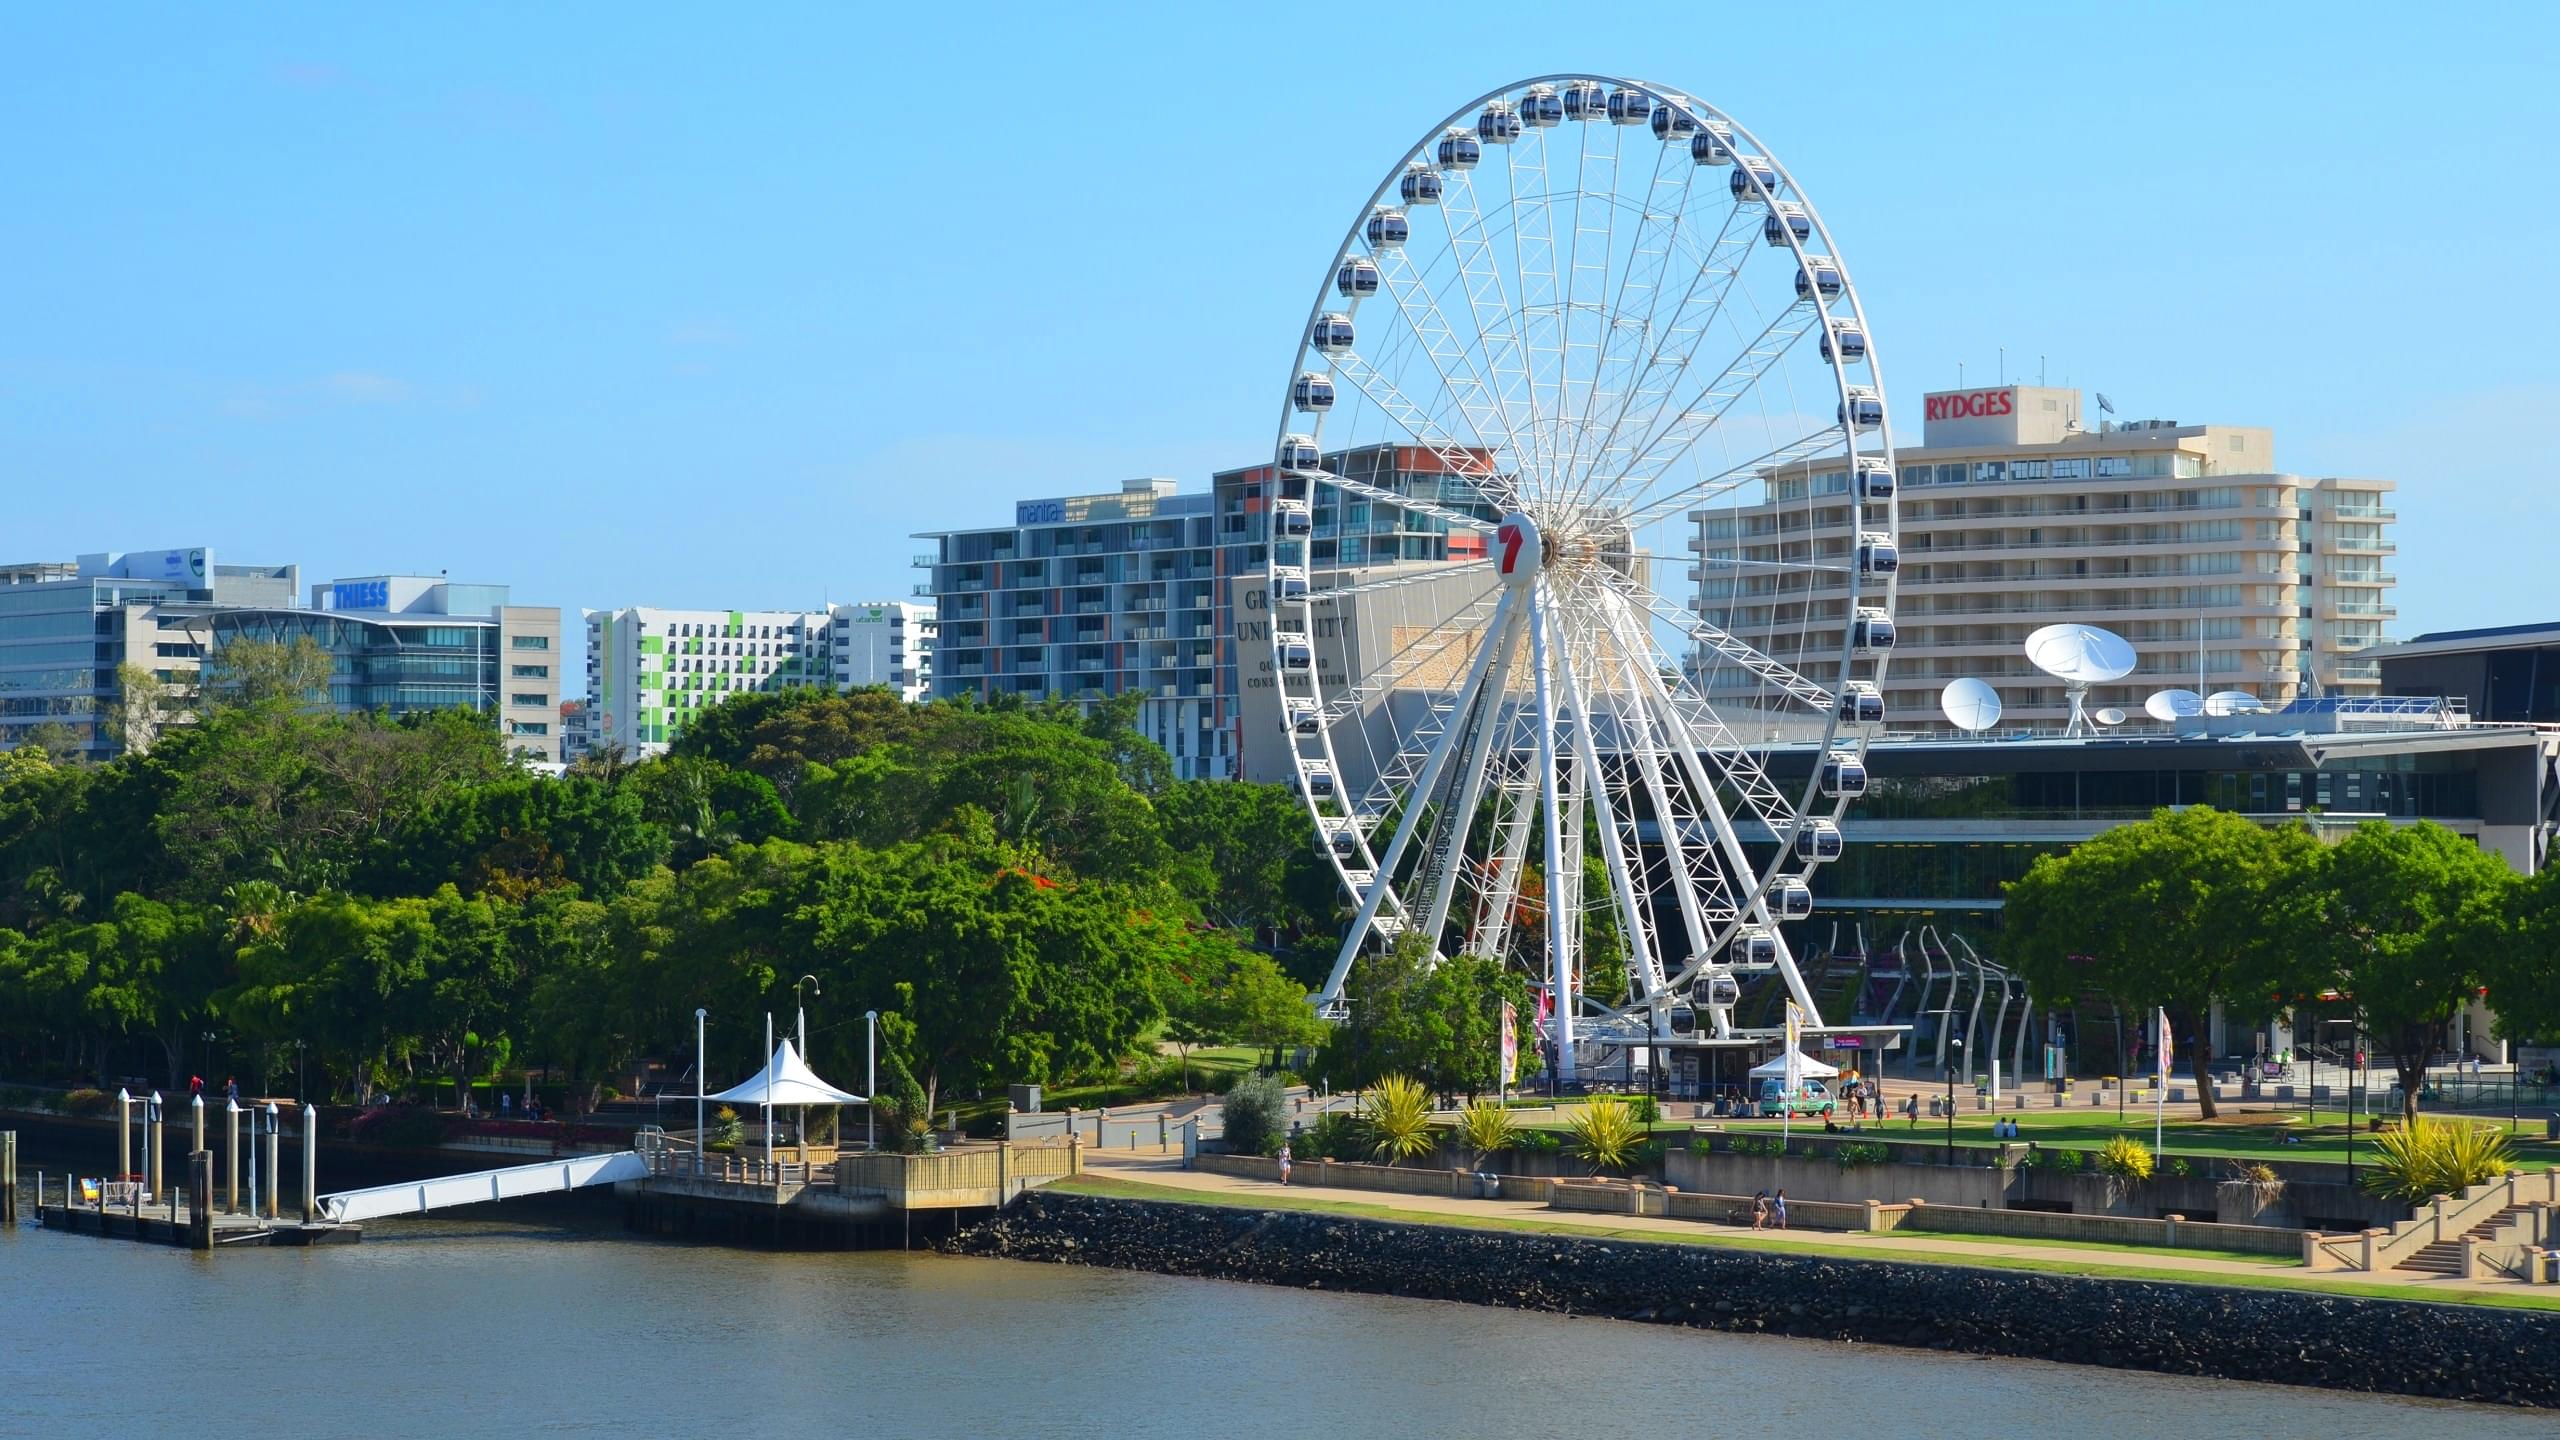 Experience a ride on the renowned observation wheel i.e. The Wheel of Brisbane